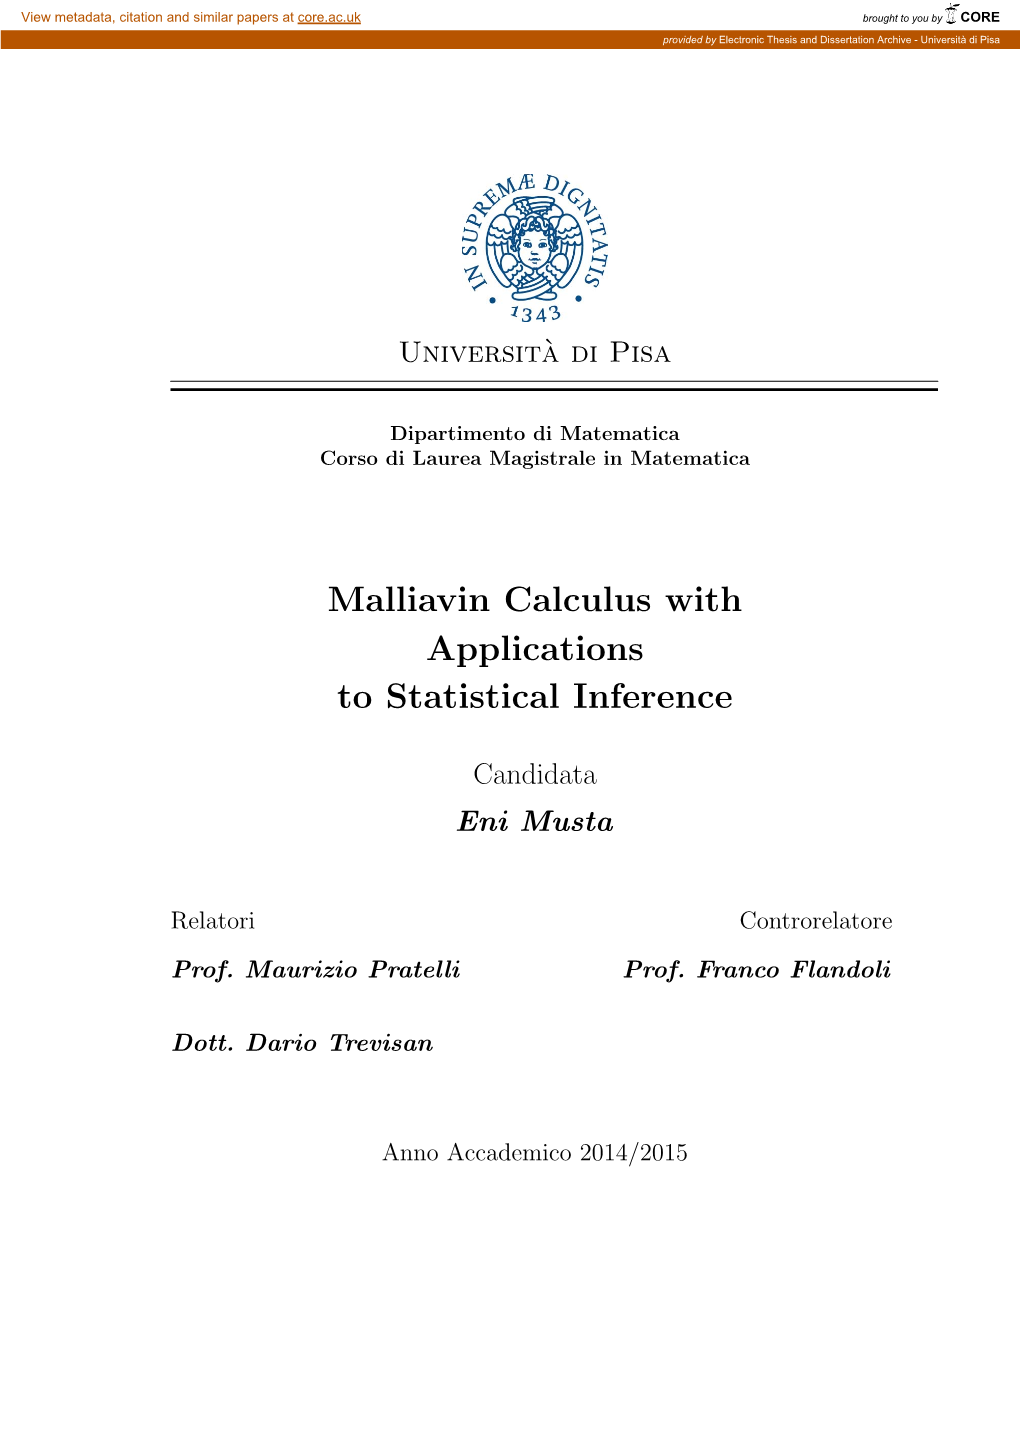 Malliavin Calculus with Applications to Statistical Inference